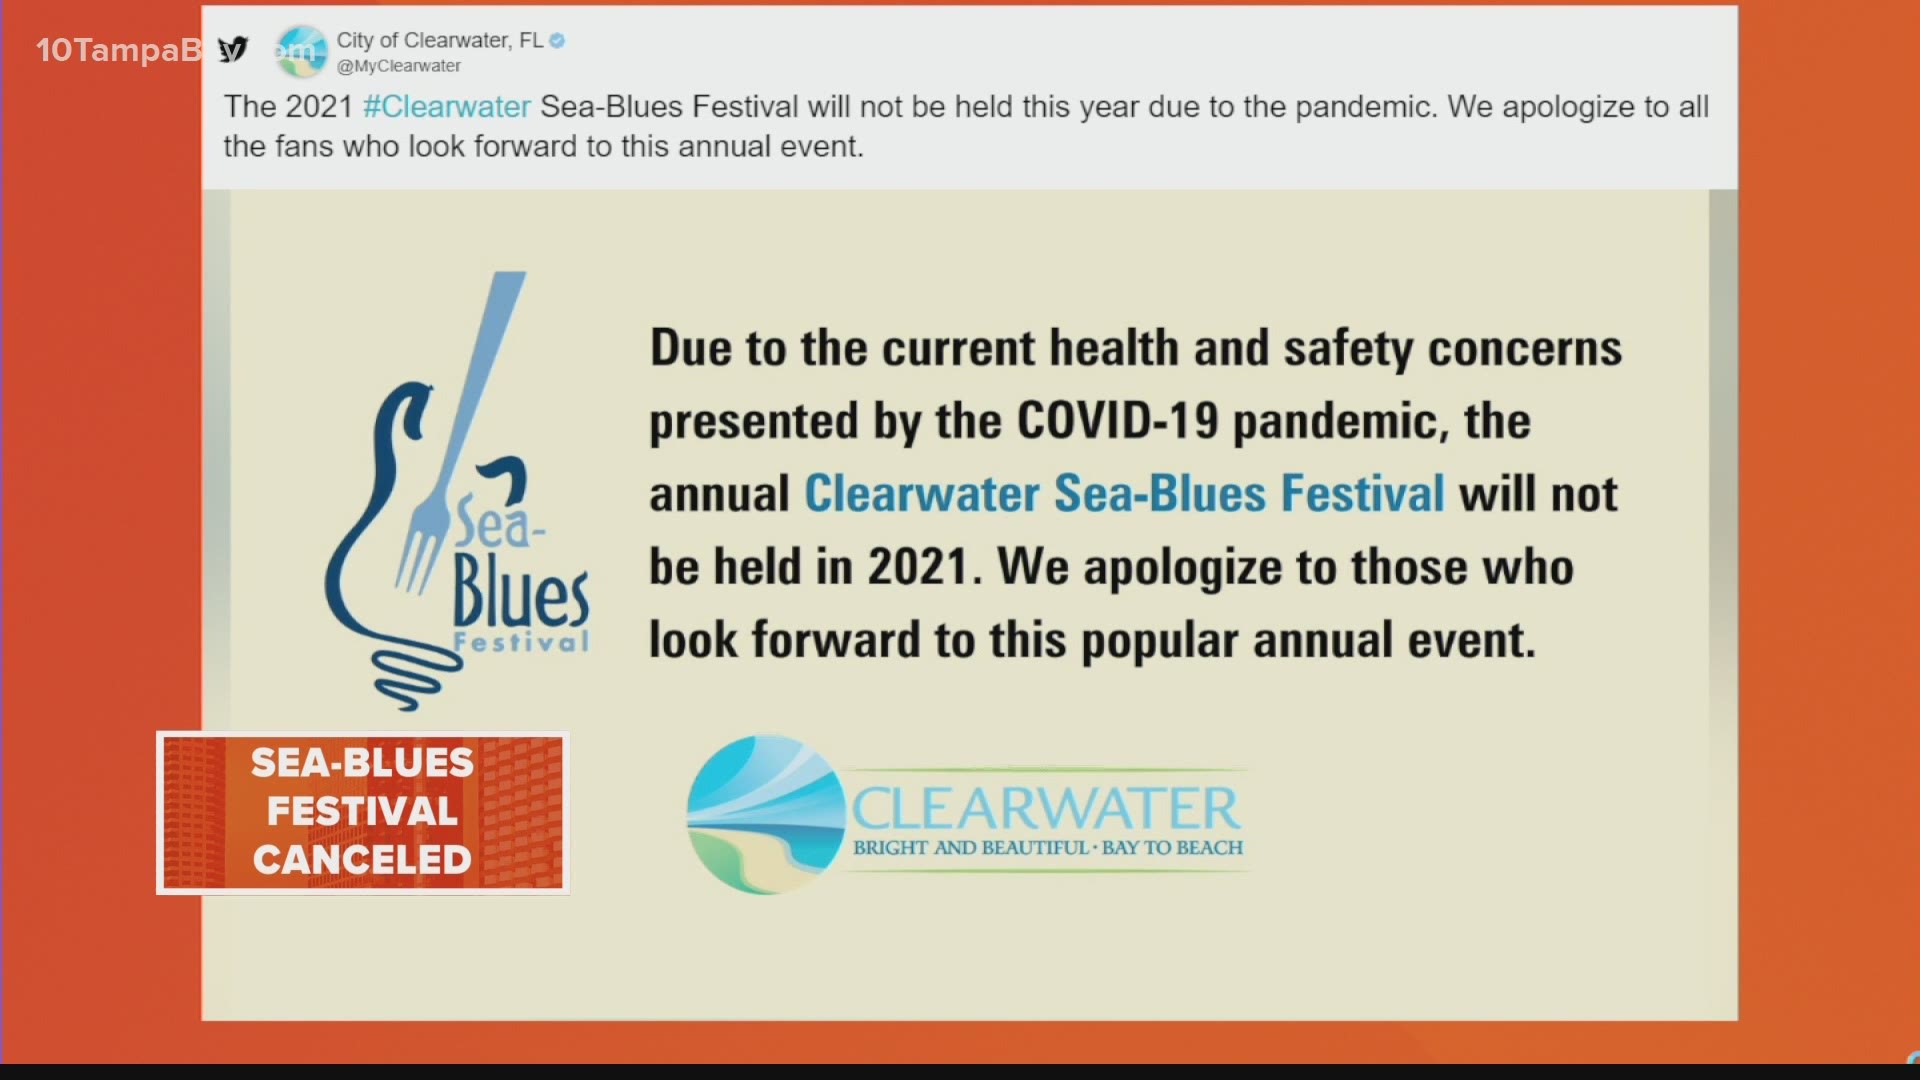 The City of Clearwater announced it will cancel this year's Sea-Blues Festival due to concerns over COVID-19 concerns.